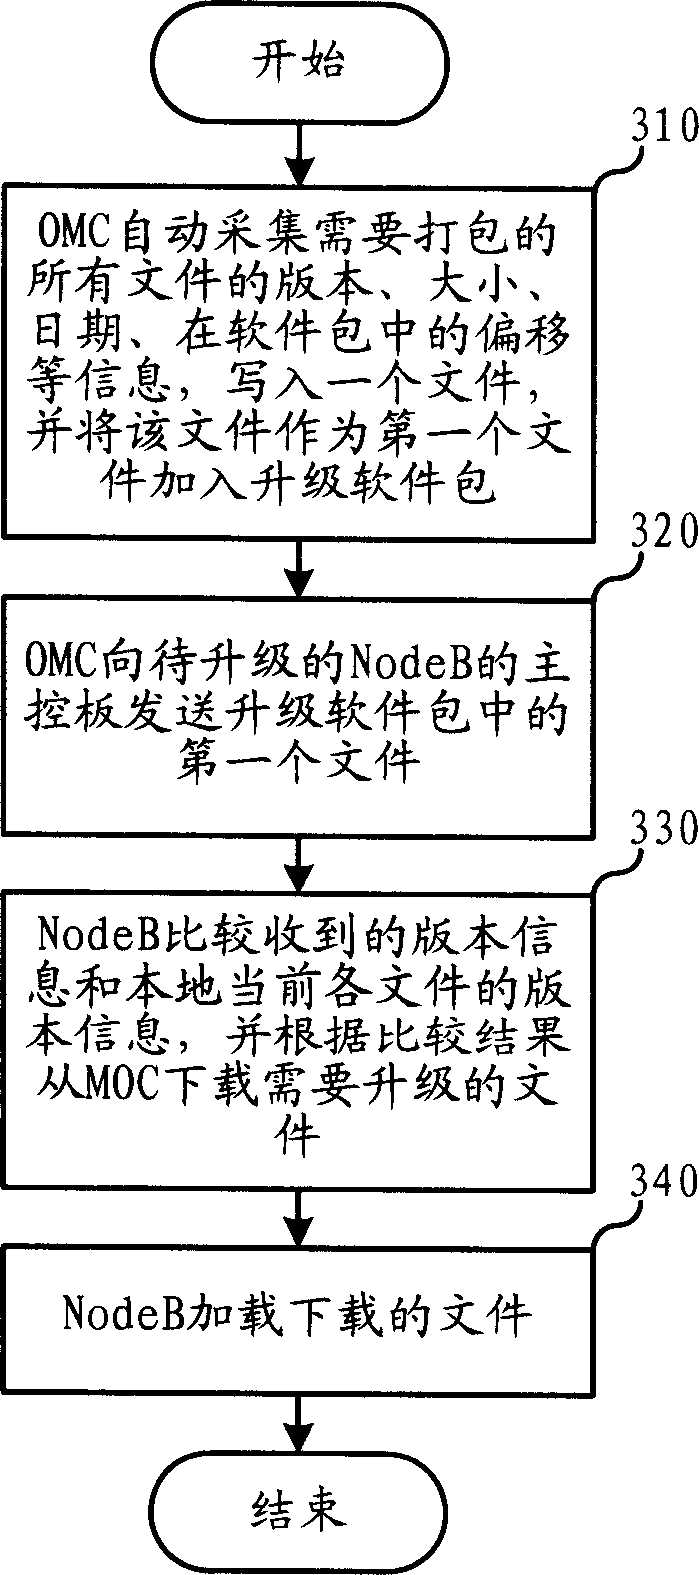 Method for upgrading remote subsystem in communication system